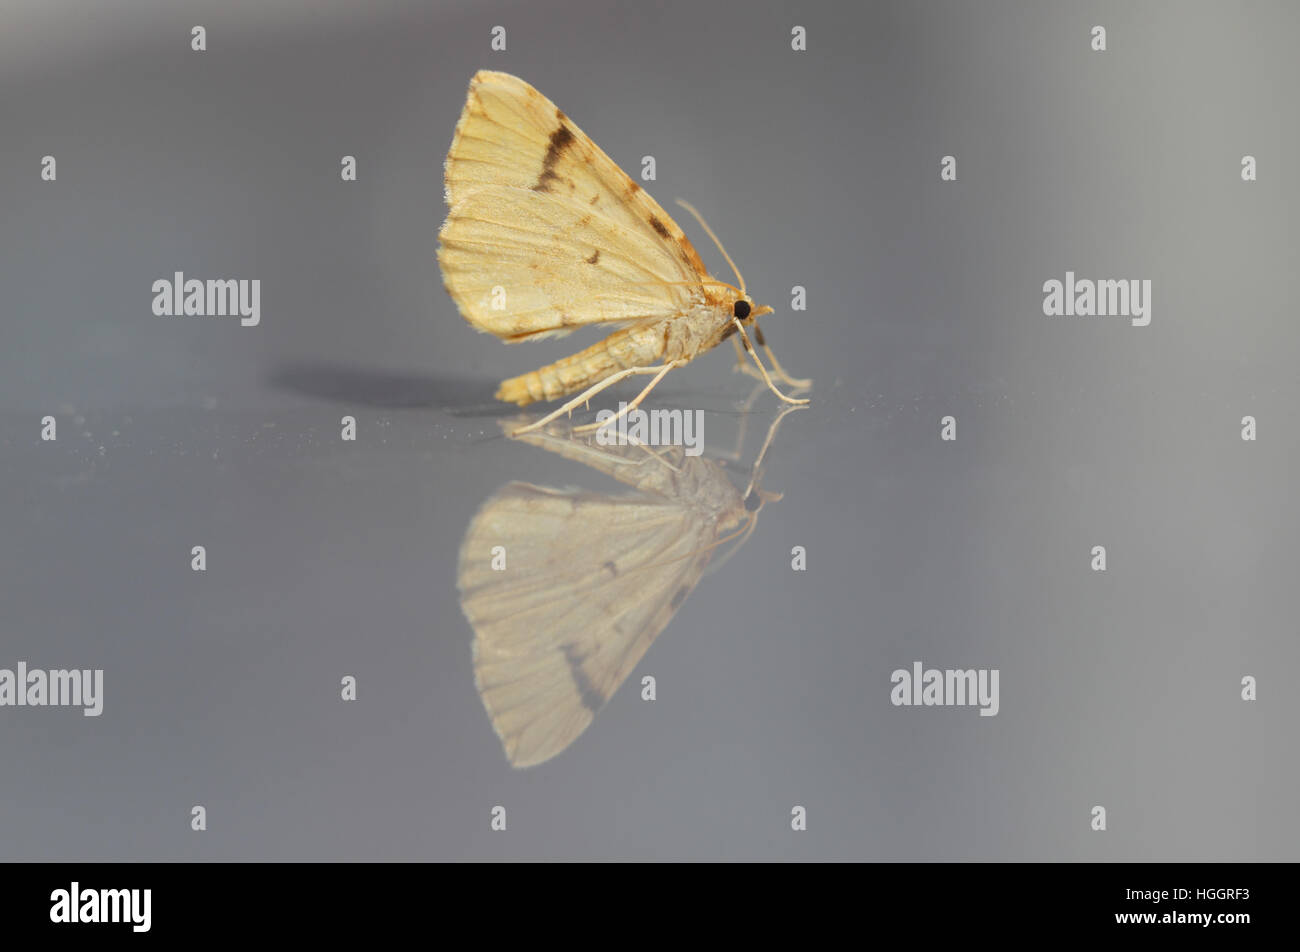 Bordered Straw (Heliothis peltigera), a migrant moth perched on a reflective surface, showing underwing Stock Photo